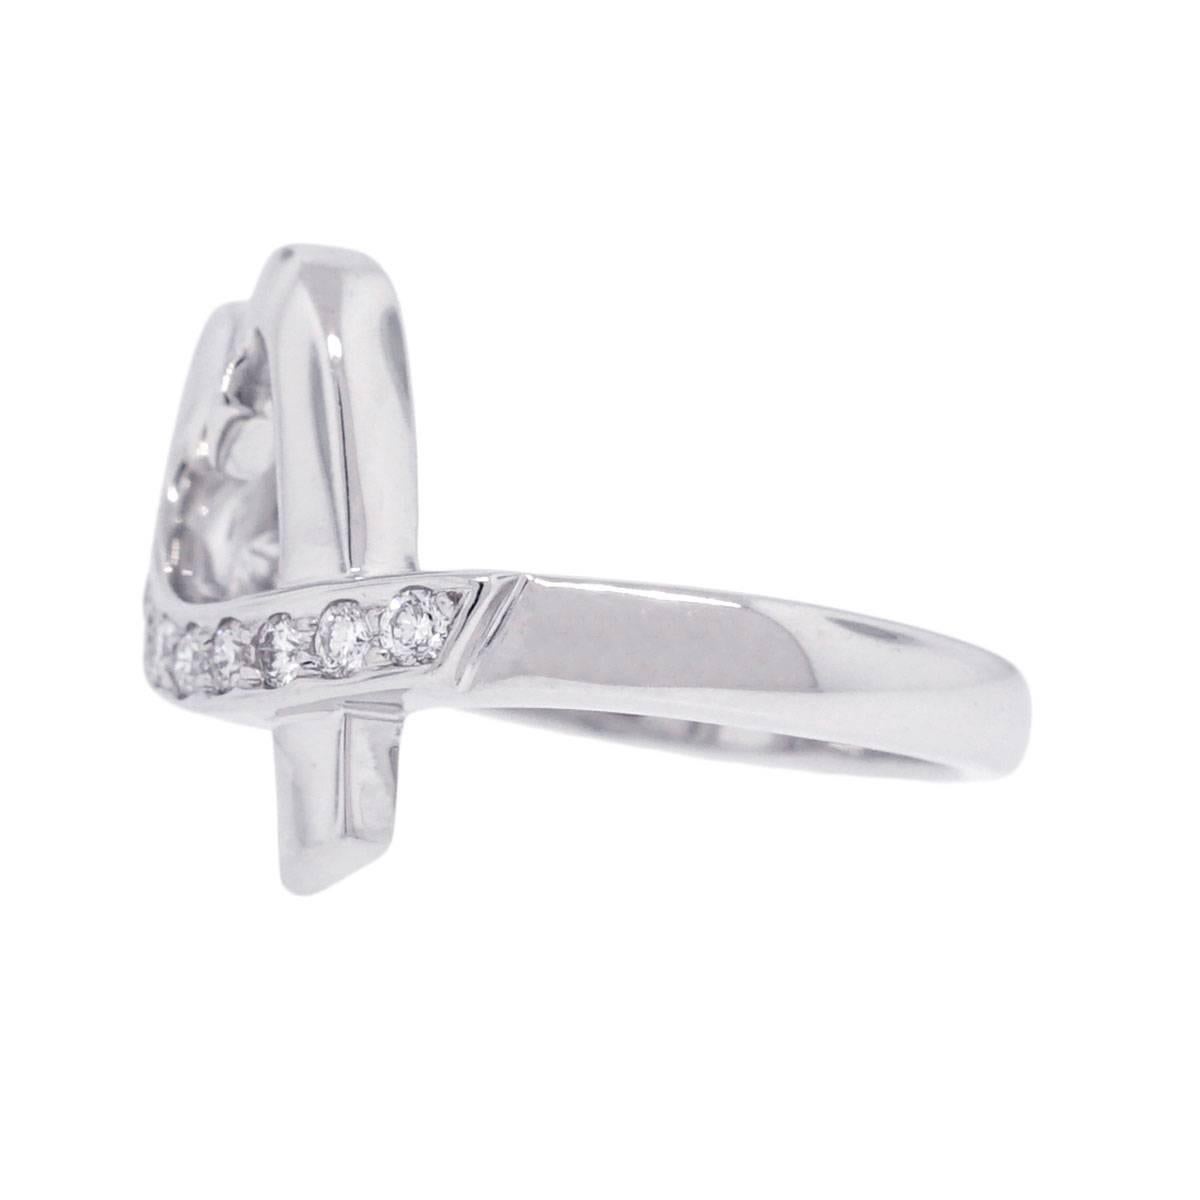 Brand: Tiffany & Co.
Style: Paloma Picasso White Gold Diamond Loving Heart Ring
Material: 18k White Gold
Diamond Details: Approximately 0.20ctw round brilliant diamonds. Diamonds are G/H in color and VS in clarity.
Ring Size: Size 5.5
Total Weight: